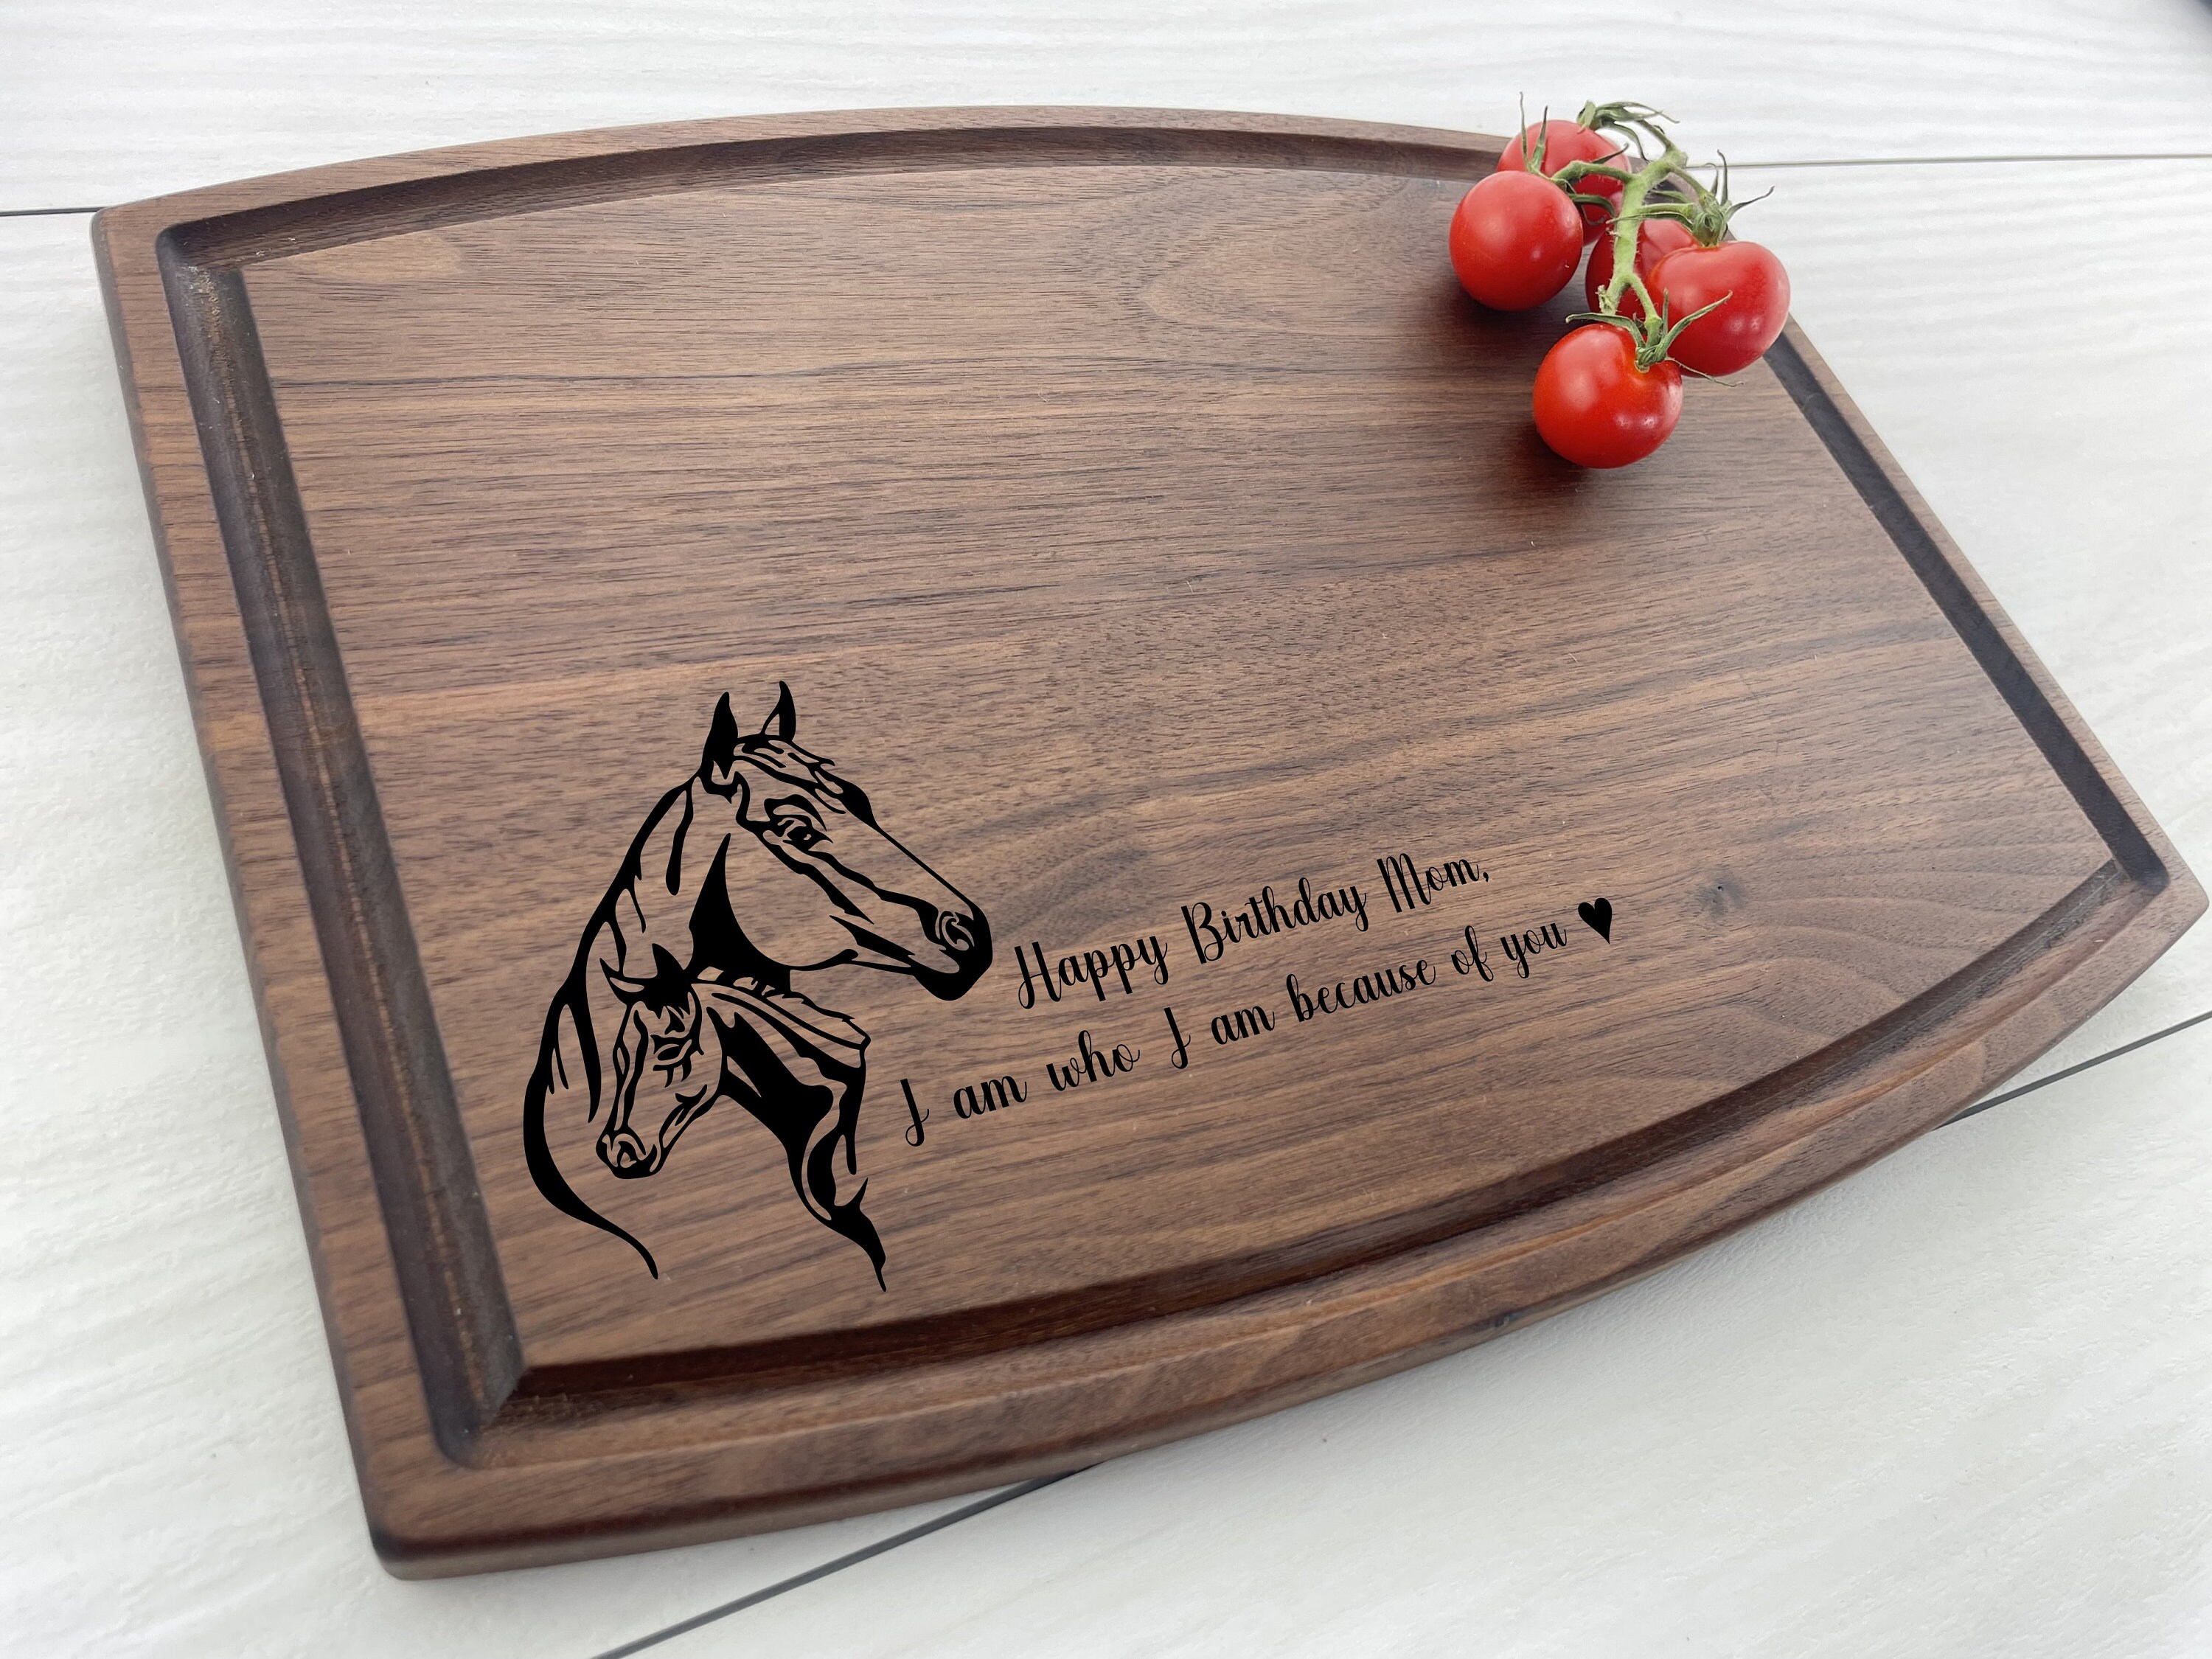 Personalized Cutting Board, Custom Cutting Board, Horse Themed Gift, Equestrian Gift, Personalized Ranch Gift, A Horse and Fawn, 199